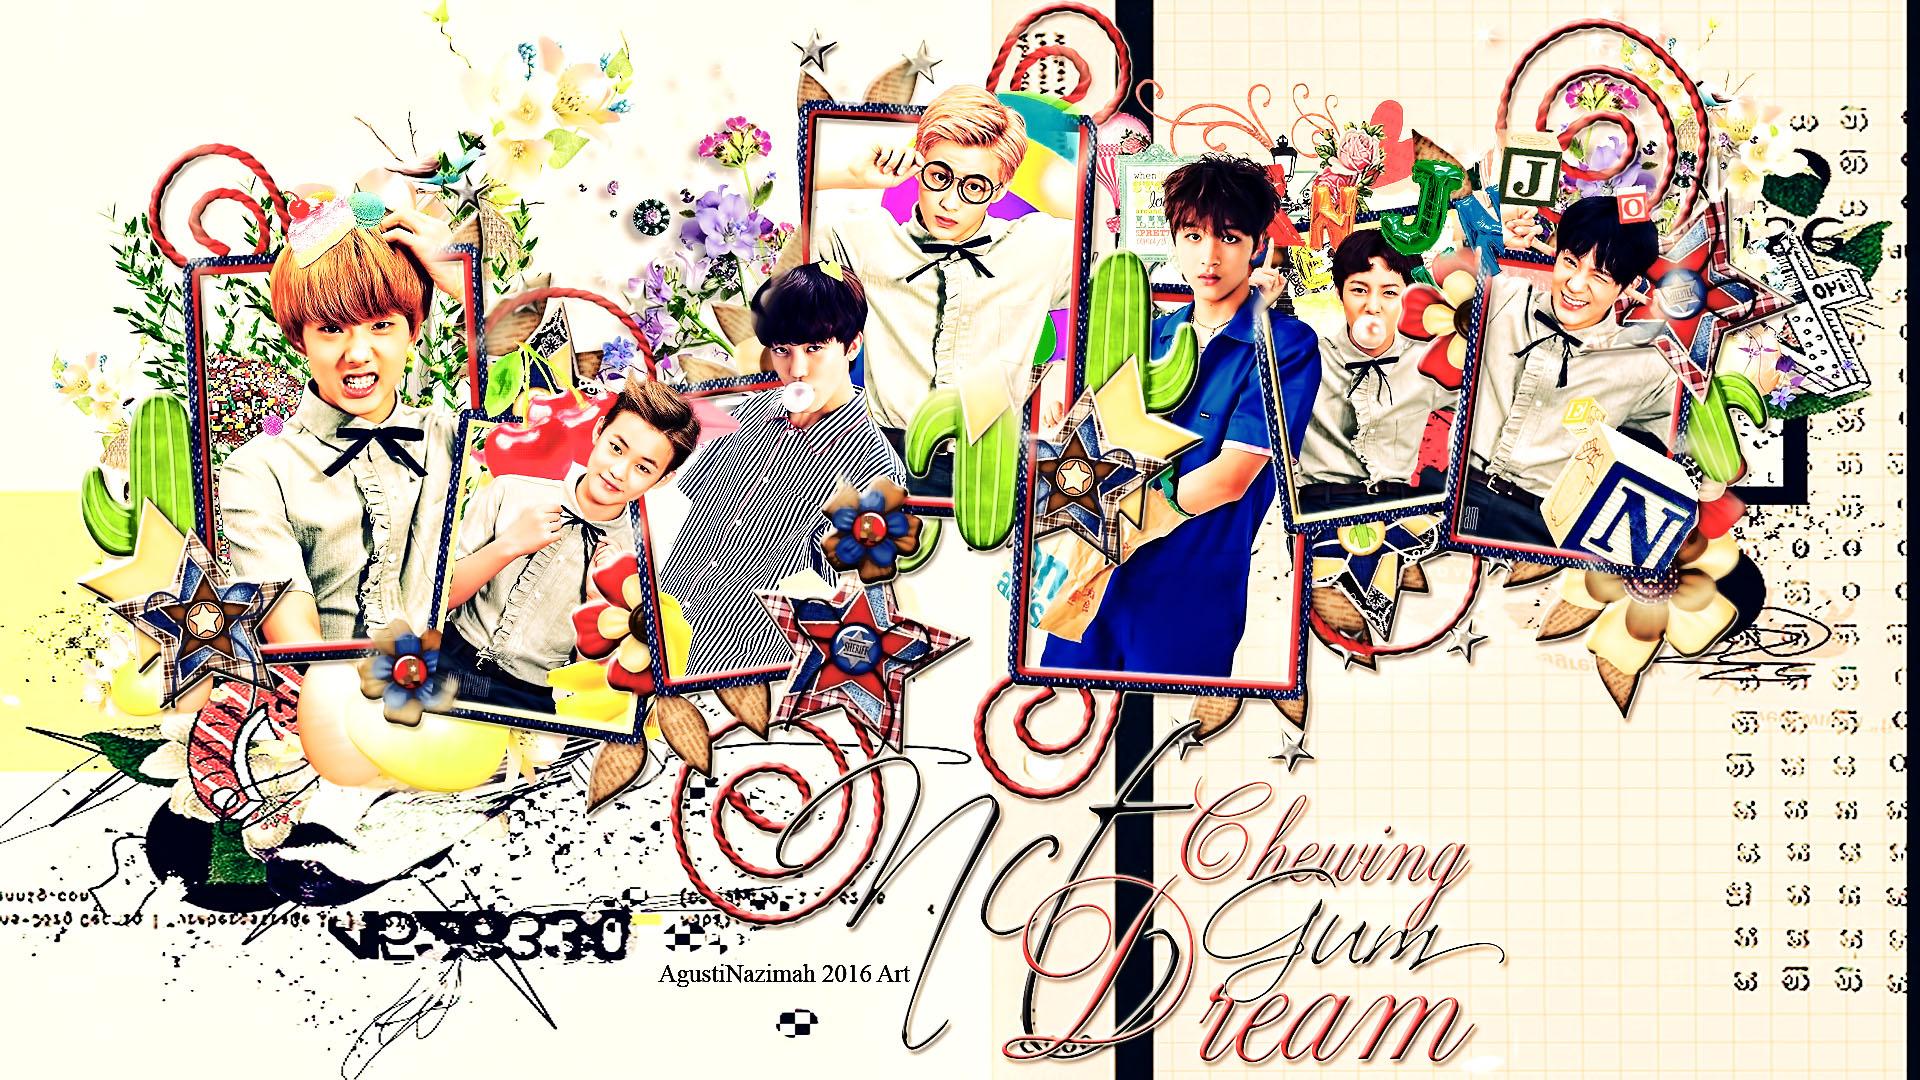 Free download [Artwork] NCT Dream For Chewing Gum AgustiNazimah